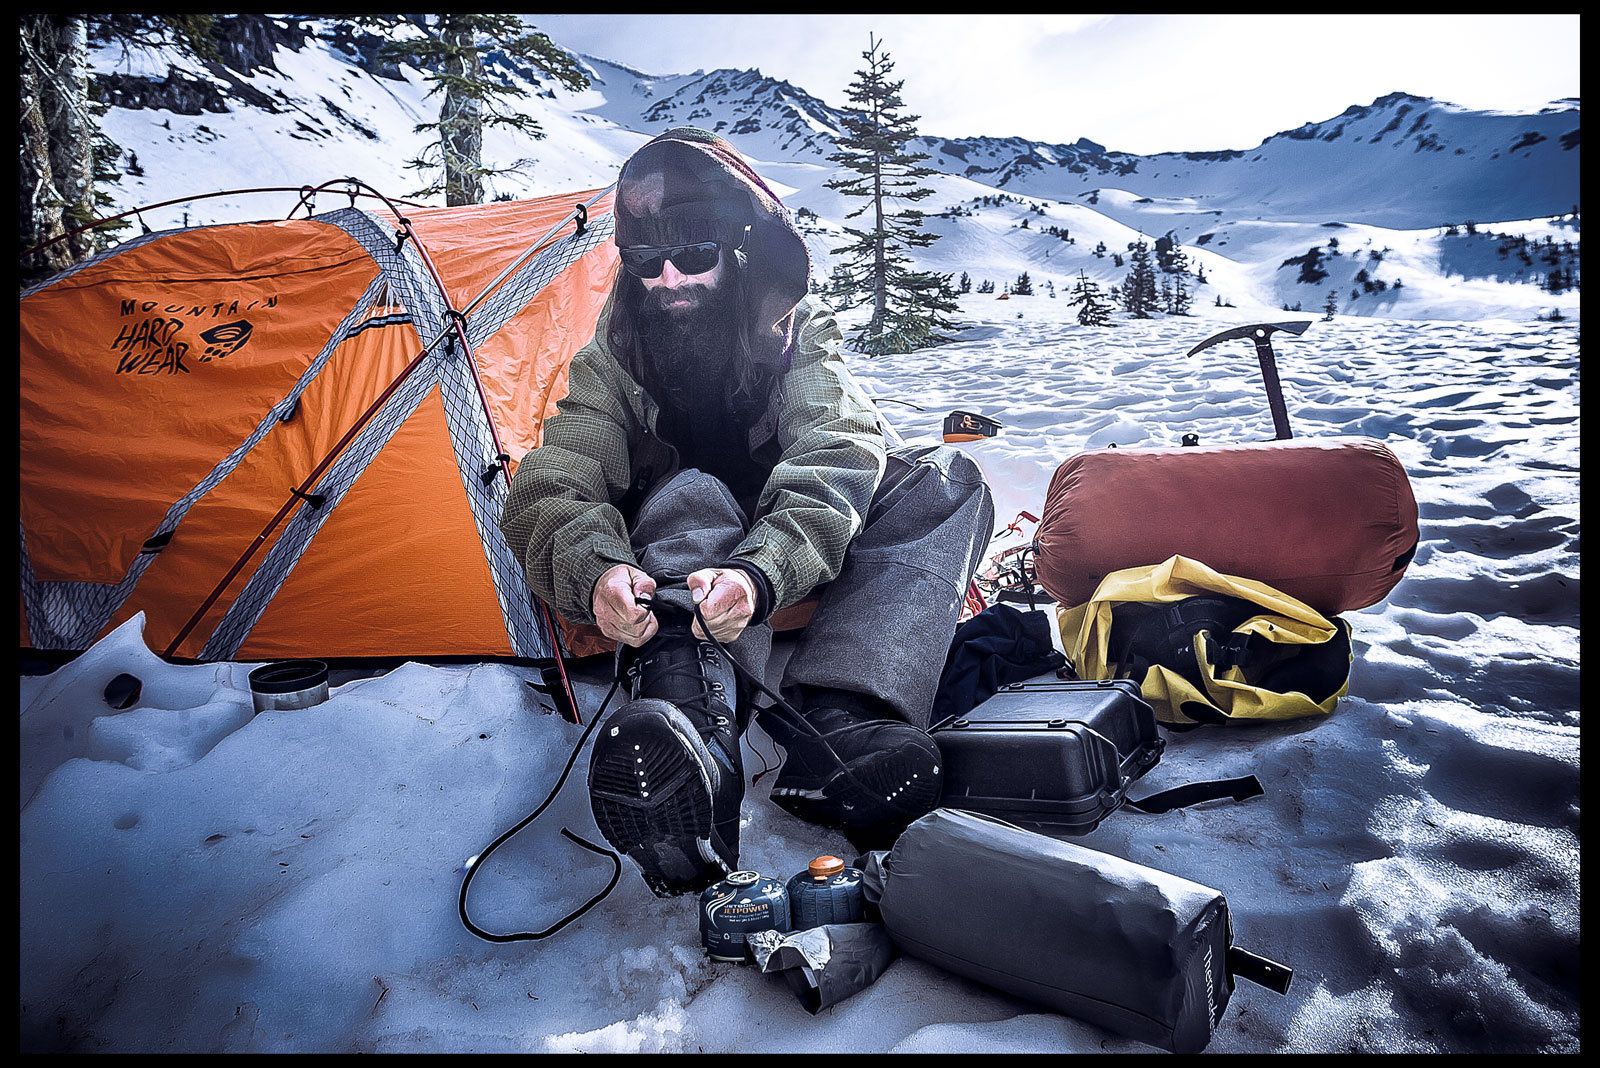 During an expedition atop Mt. Shasta for Jones Snowboards, V.8